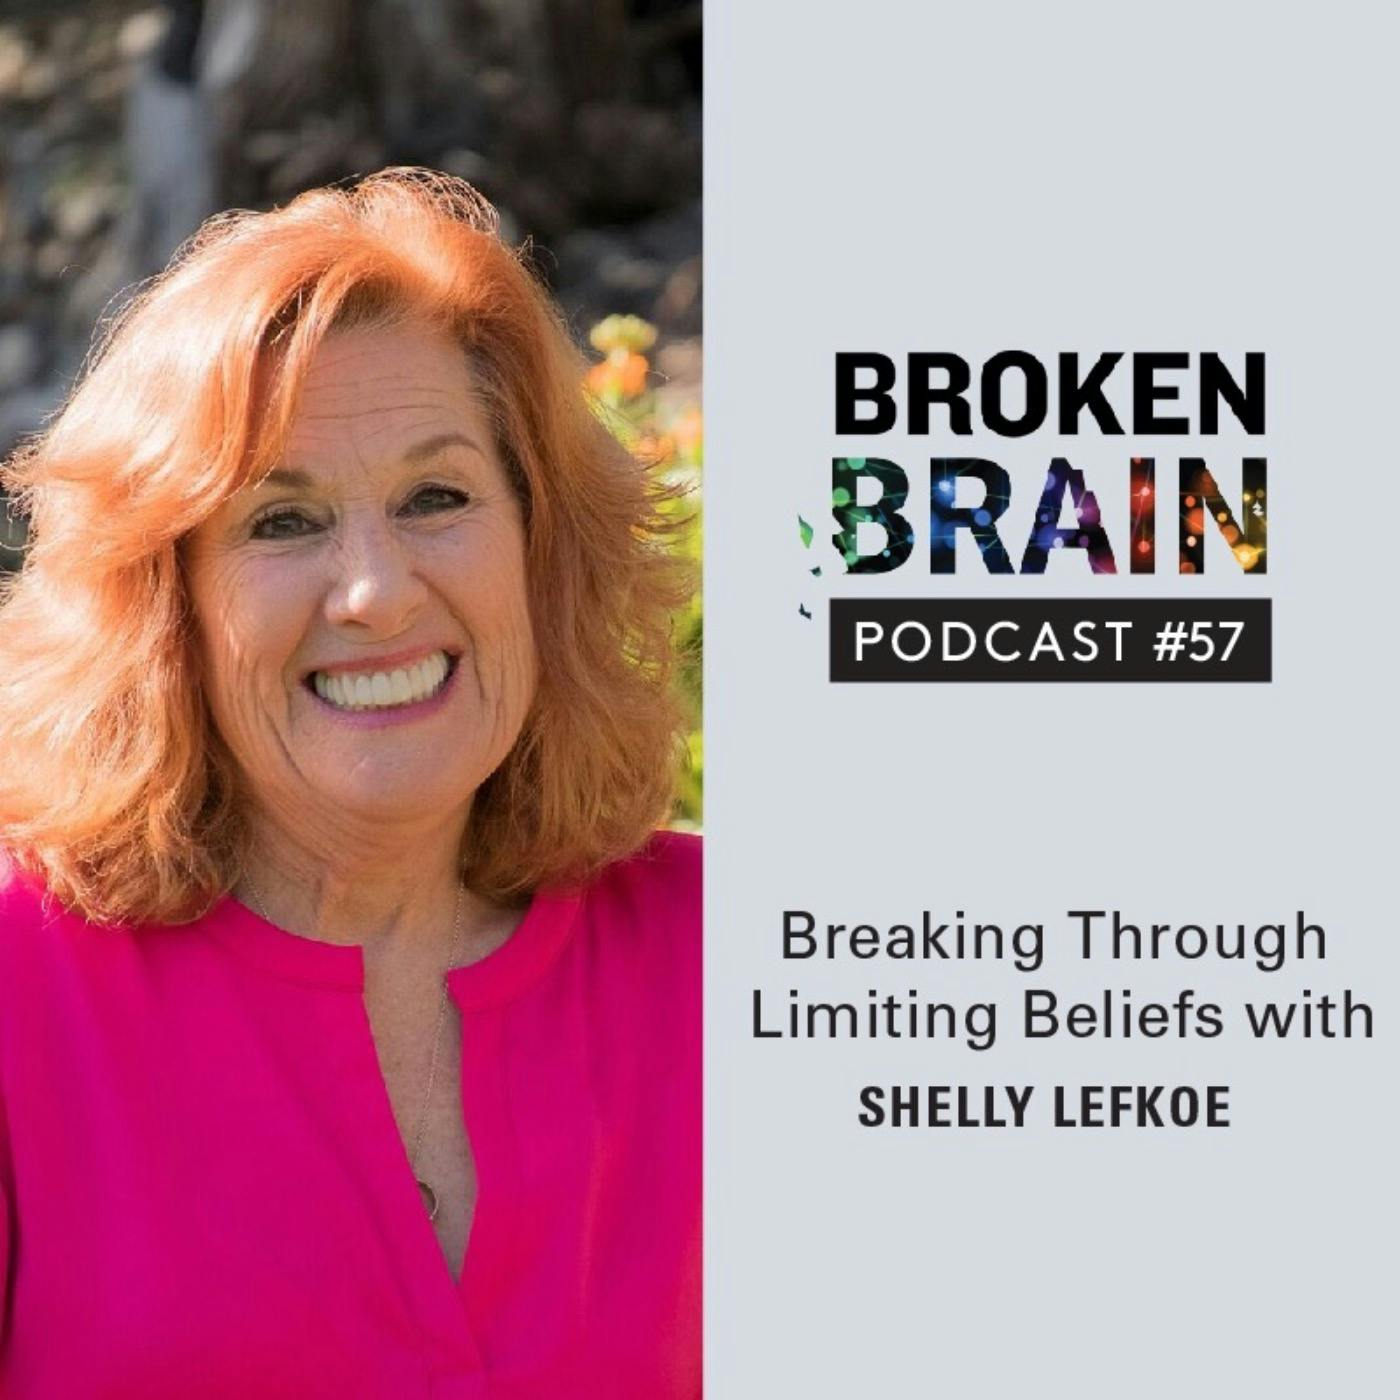 #57: Breaking Through Limiting Beliefs with Shelly Lefkoe